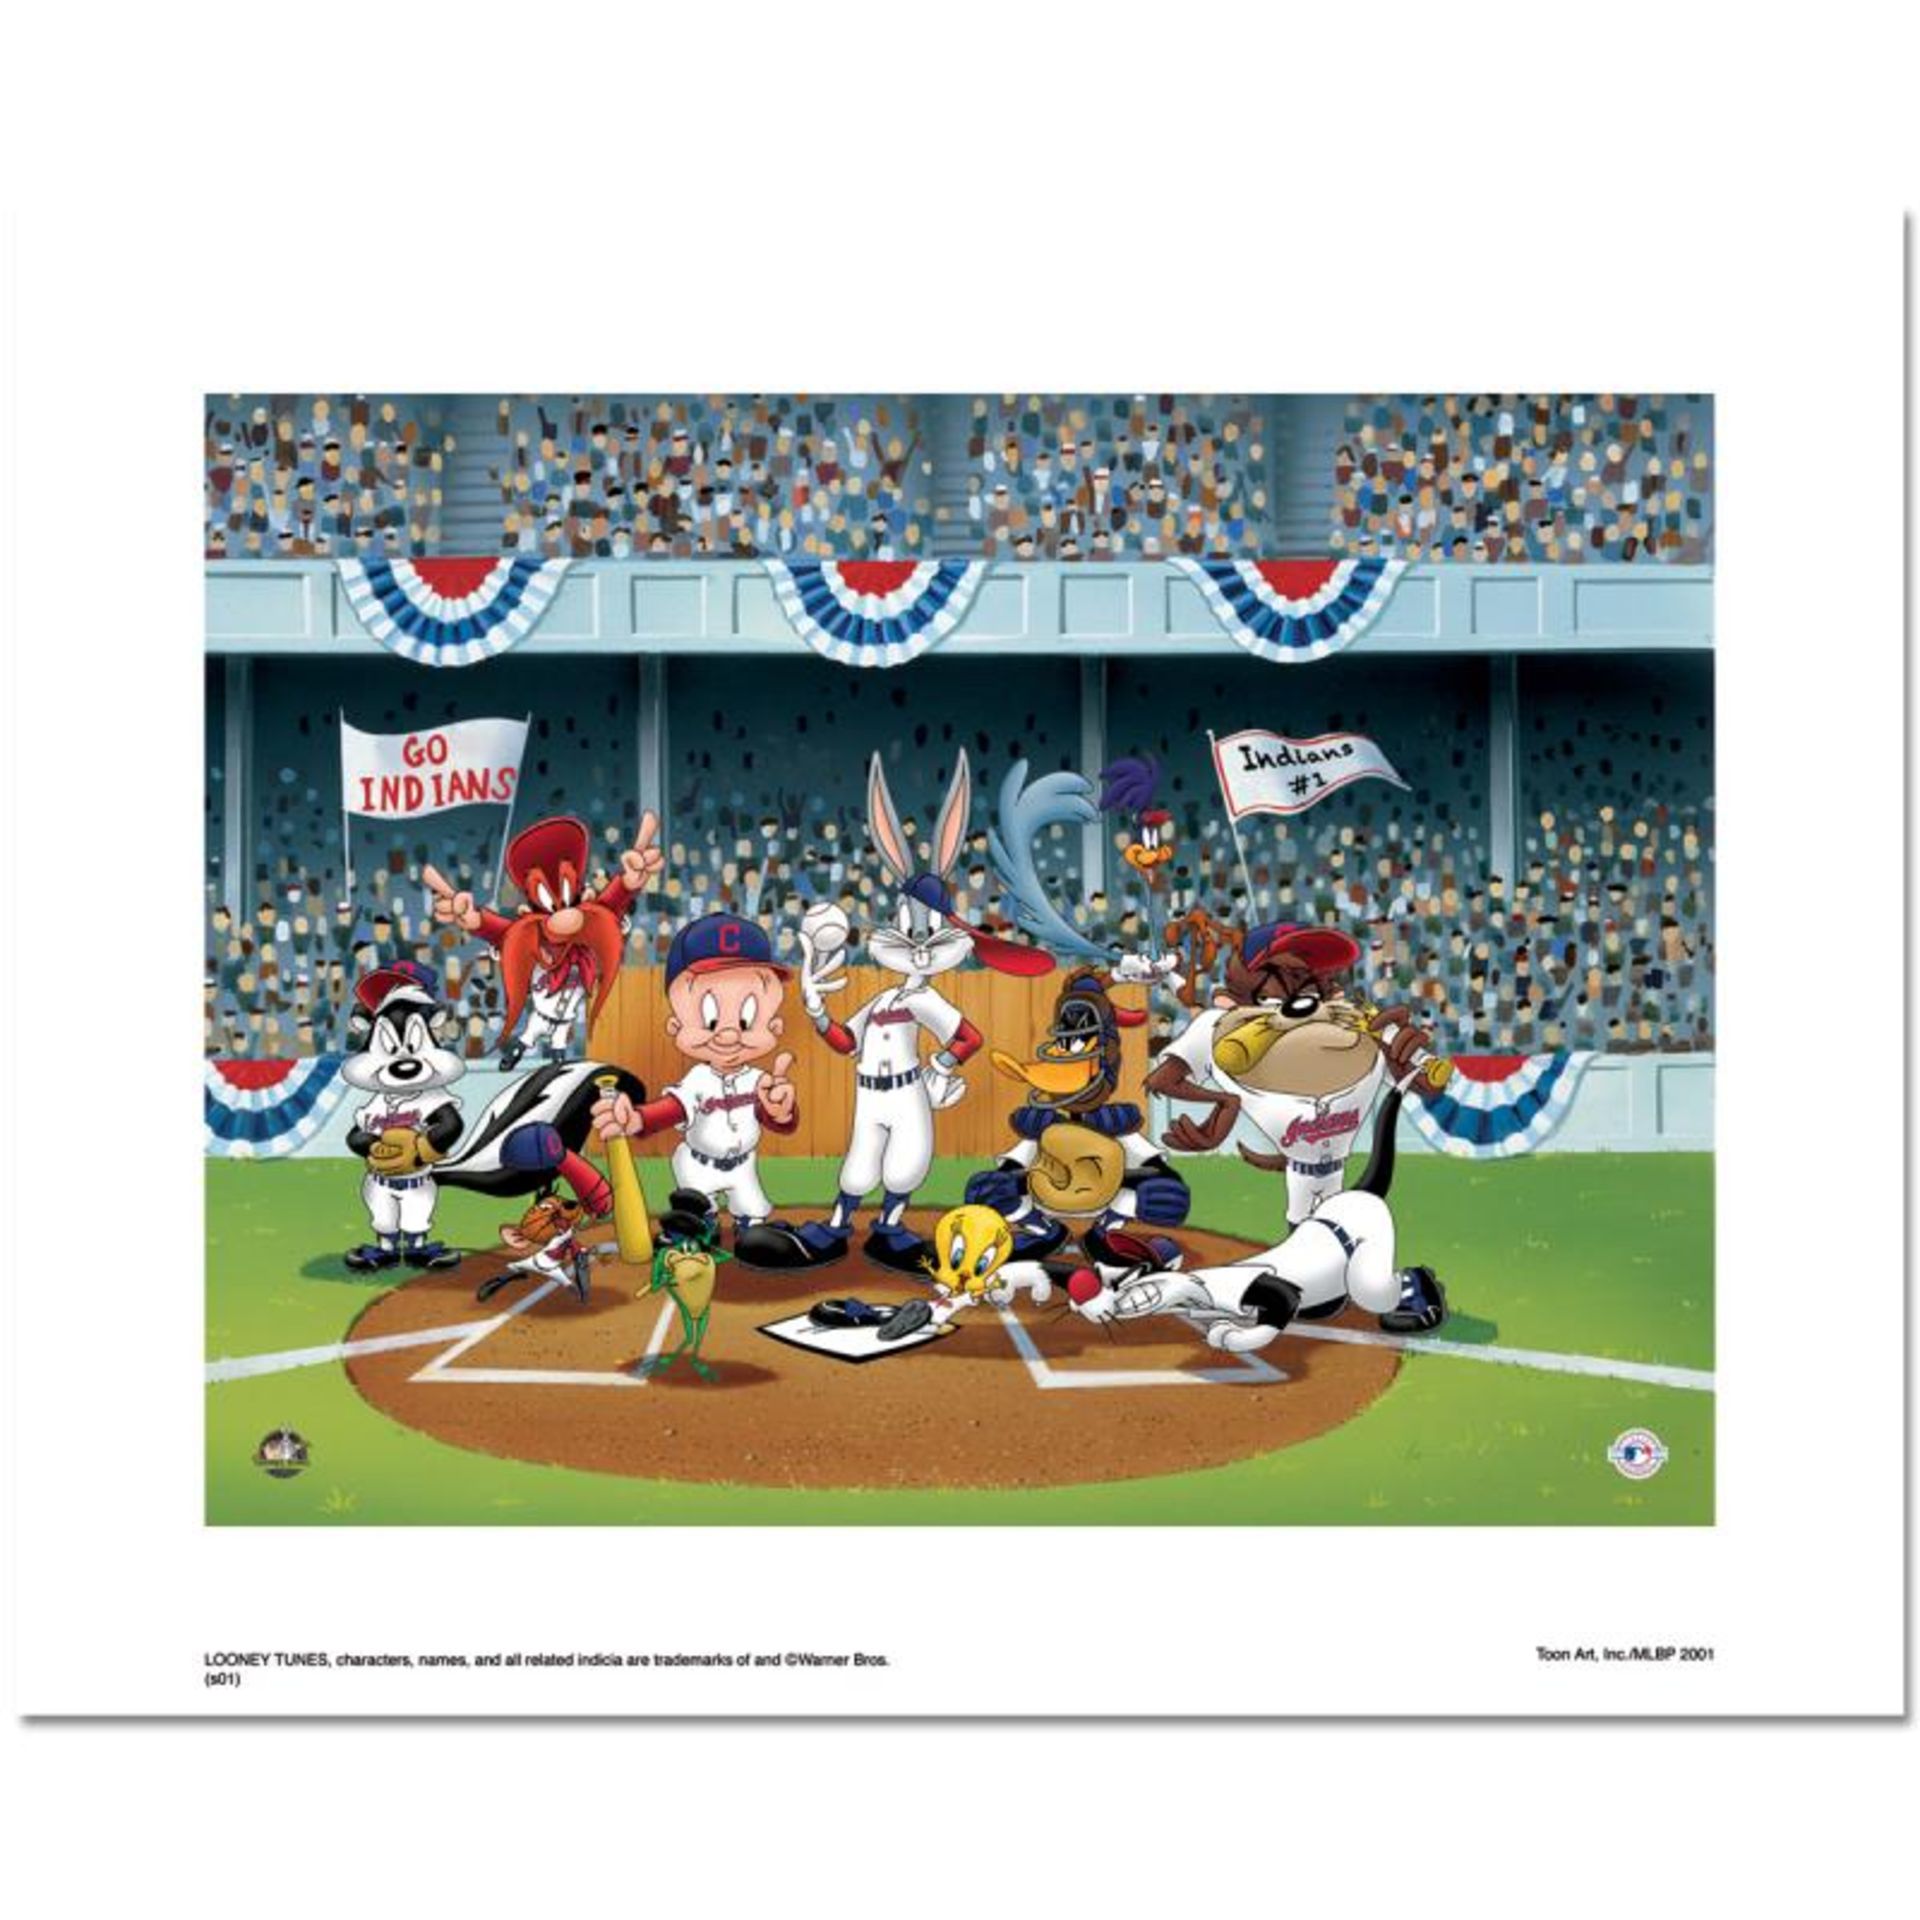 "Line Up At The Plate (Indians)" is a Limited Edition Giclee from Warner Brother